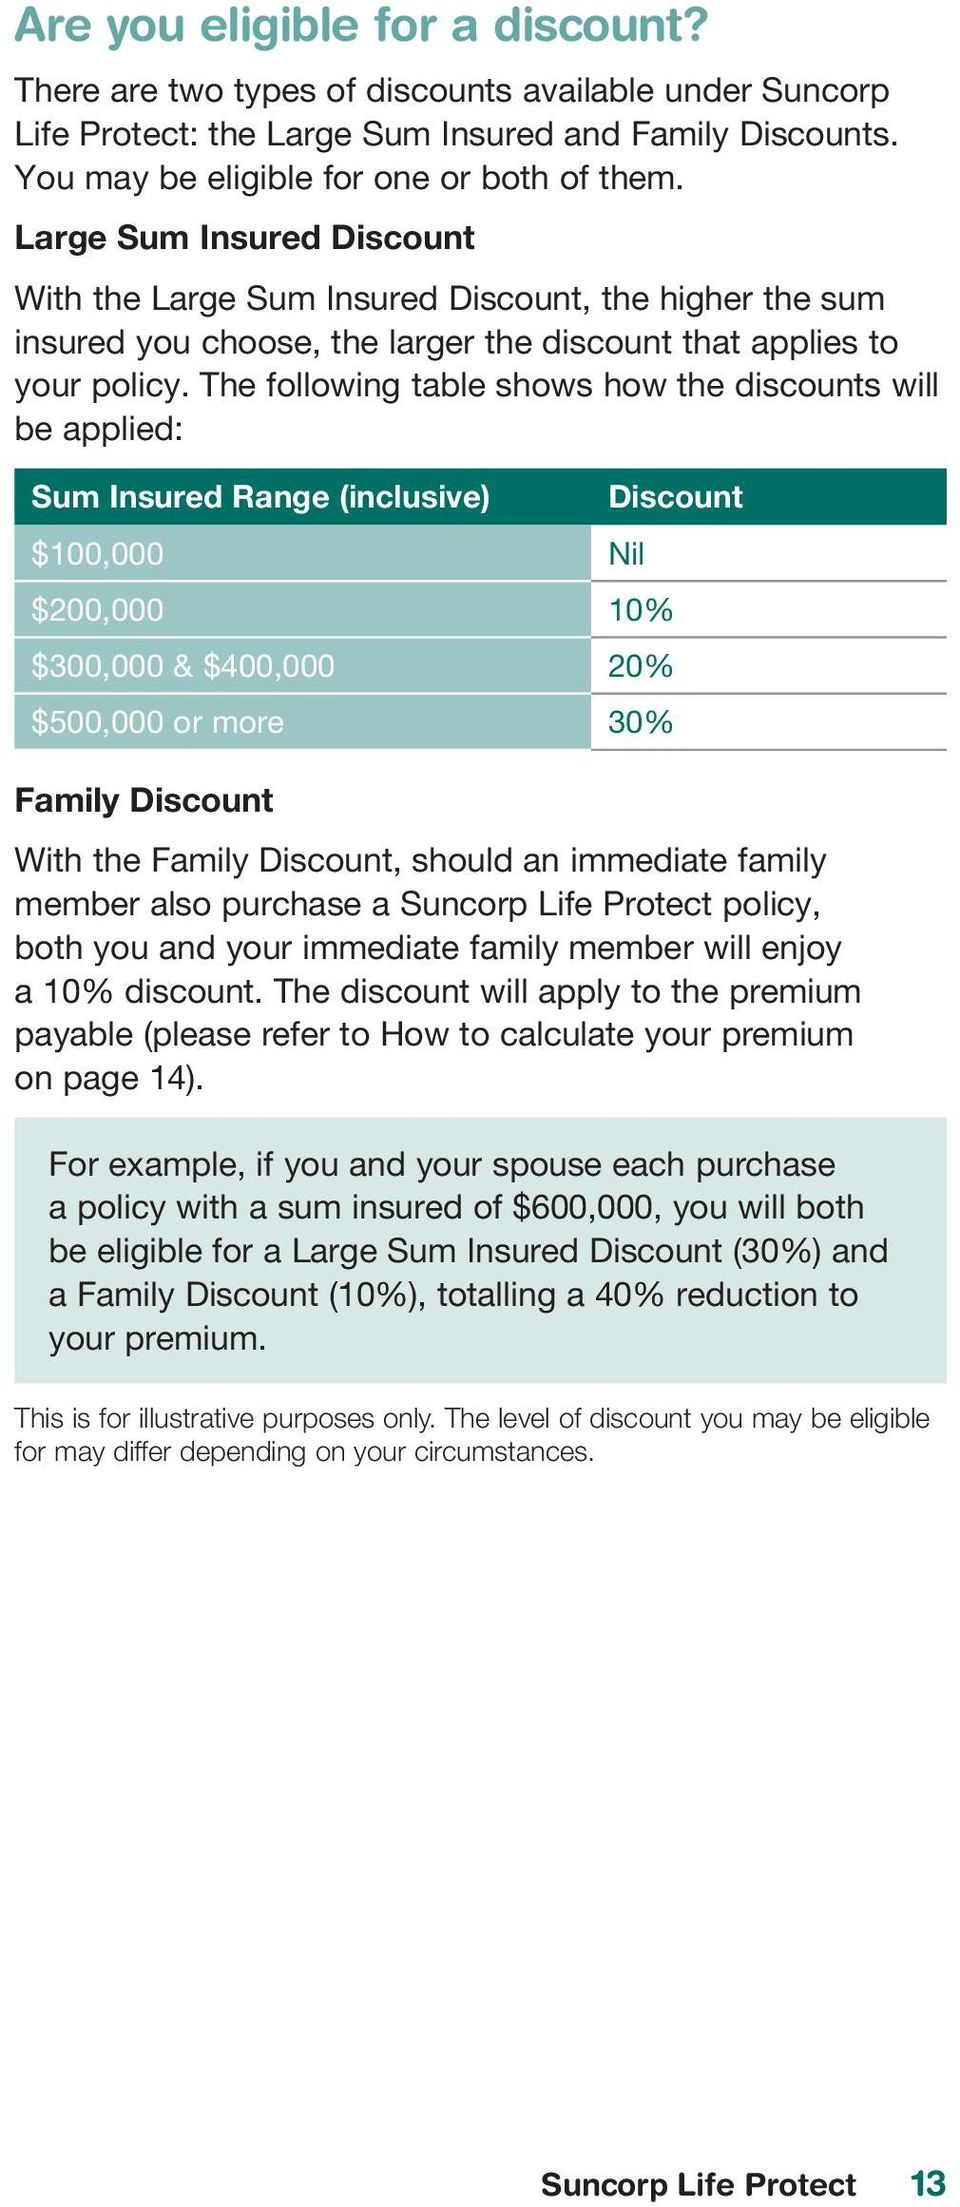 The following table shows how the discounts will be applied: Sum Insured Range (inclusive) Discount $100,000 Nil $200,000 10% $300,000 & $400,000 20% $500,000 or more 30% Family Discount With the